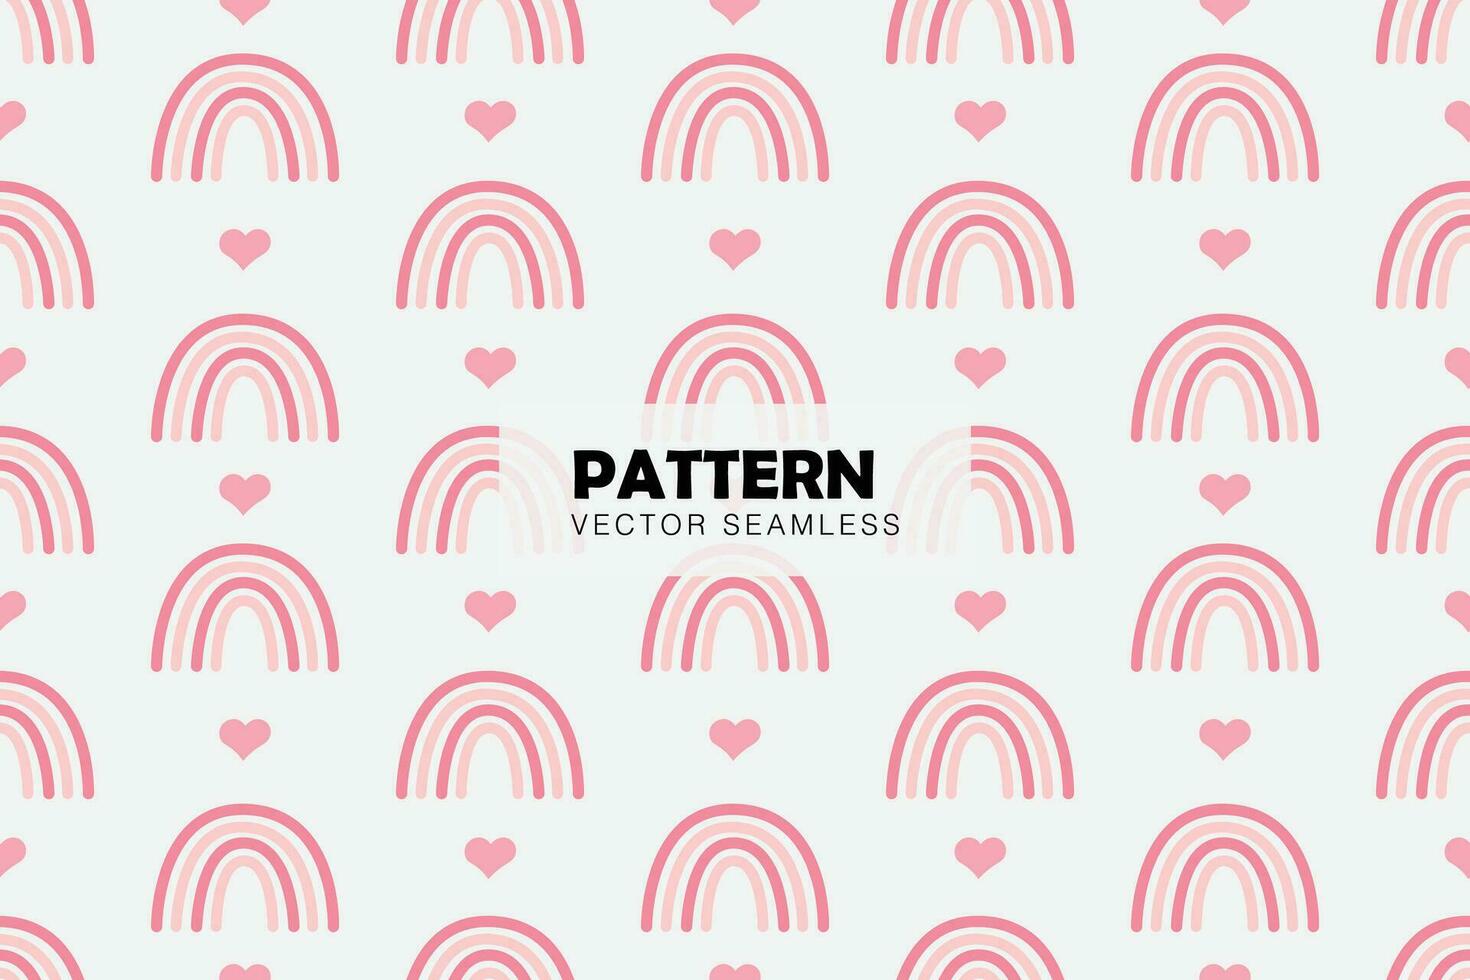 Pink rainbow and heart cute shapes seamless repeat pattern vector